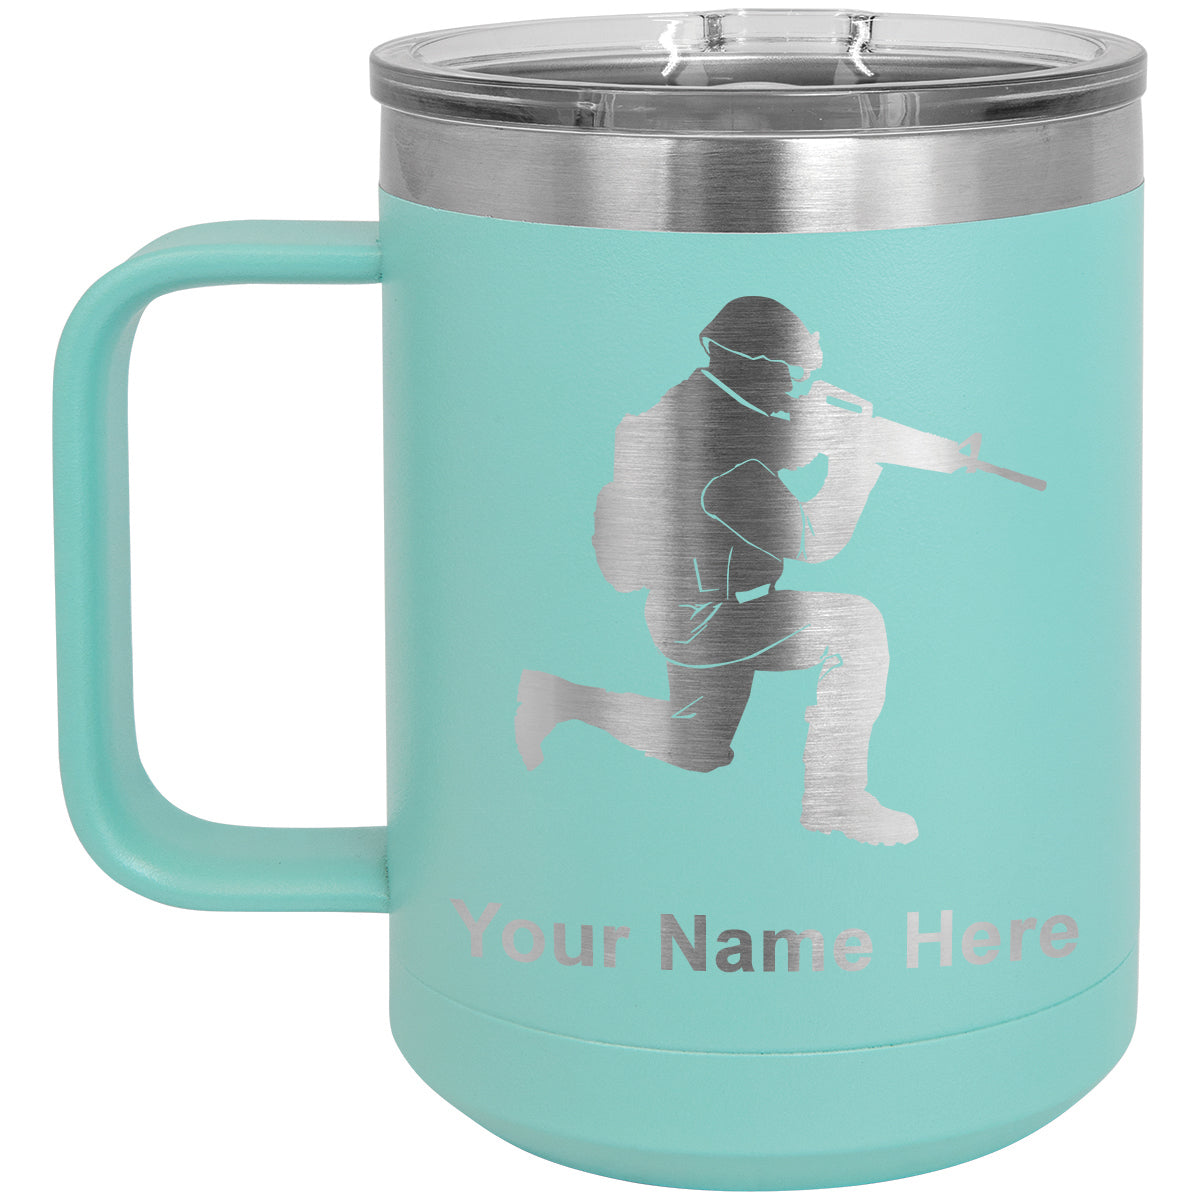 15oz Vacuum Insulated Coffee Mug, Military Soldier, Personalized Engraving Included